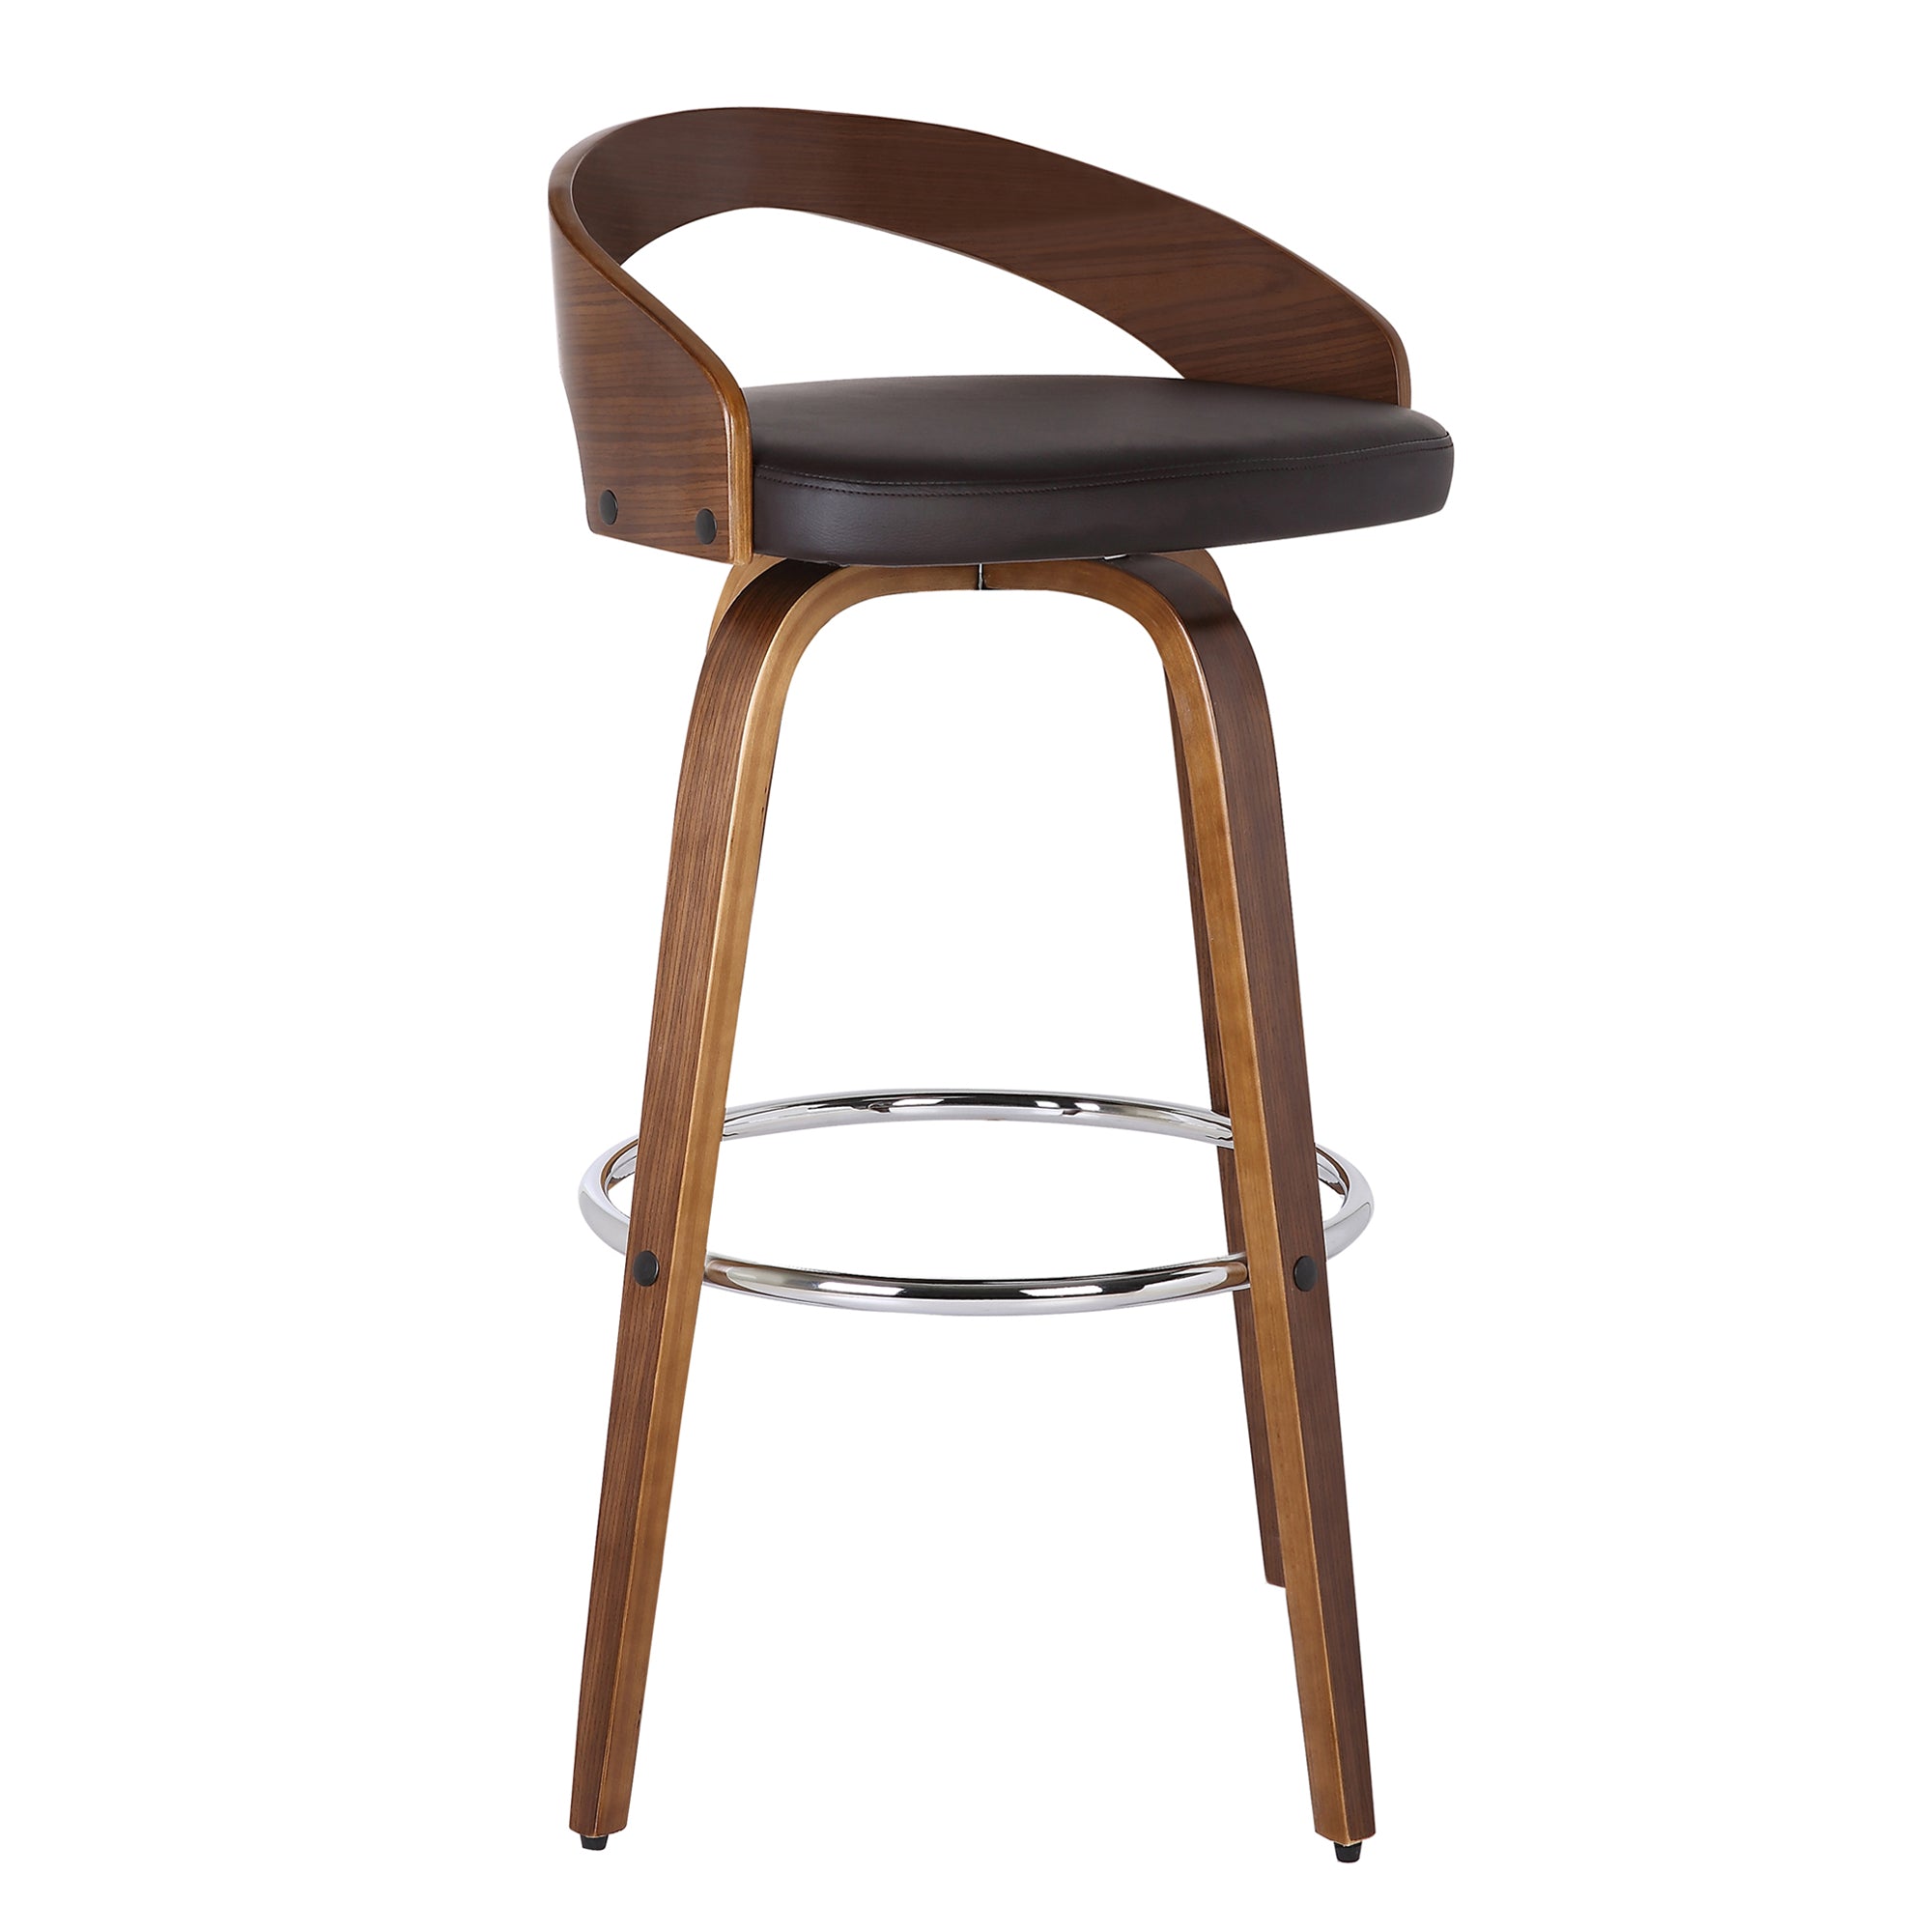 Armen Living Lcsobabrwa30 Sonia 30" Bar Height Barstool In Walnut Wood Finish With Brown Faux Leather